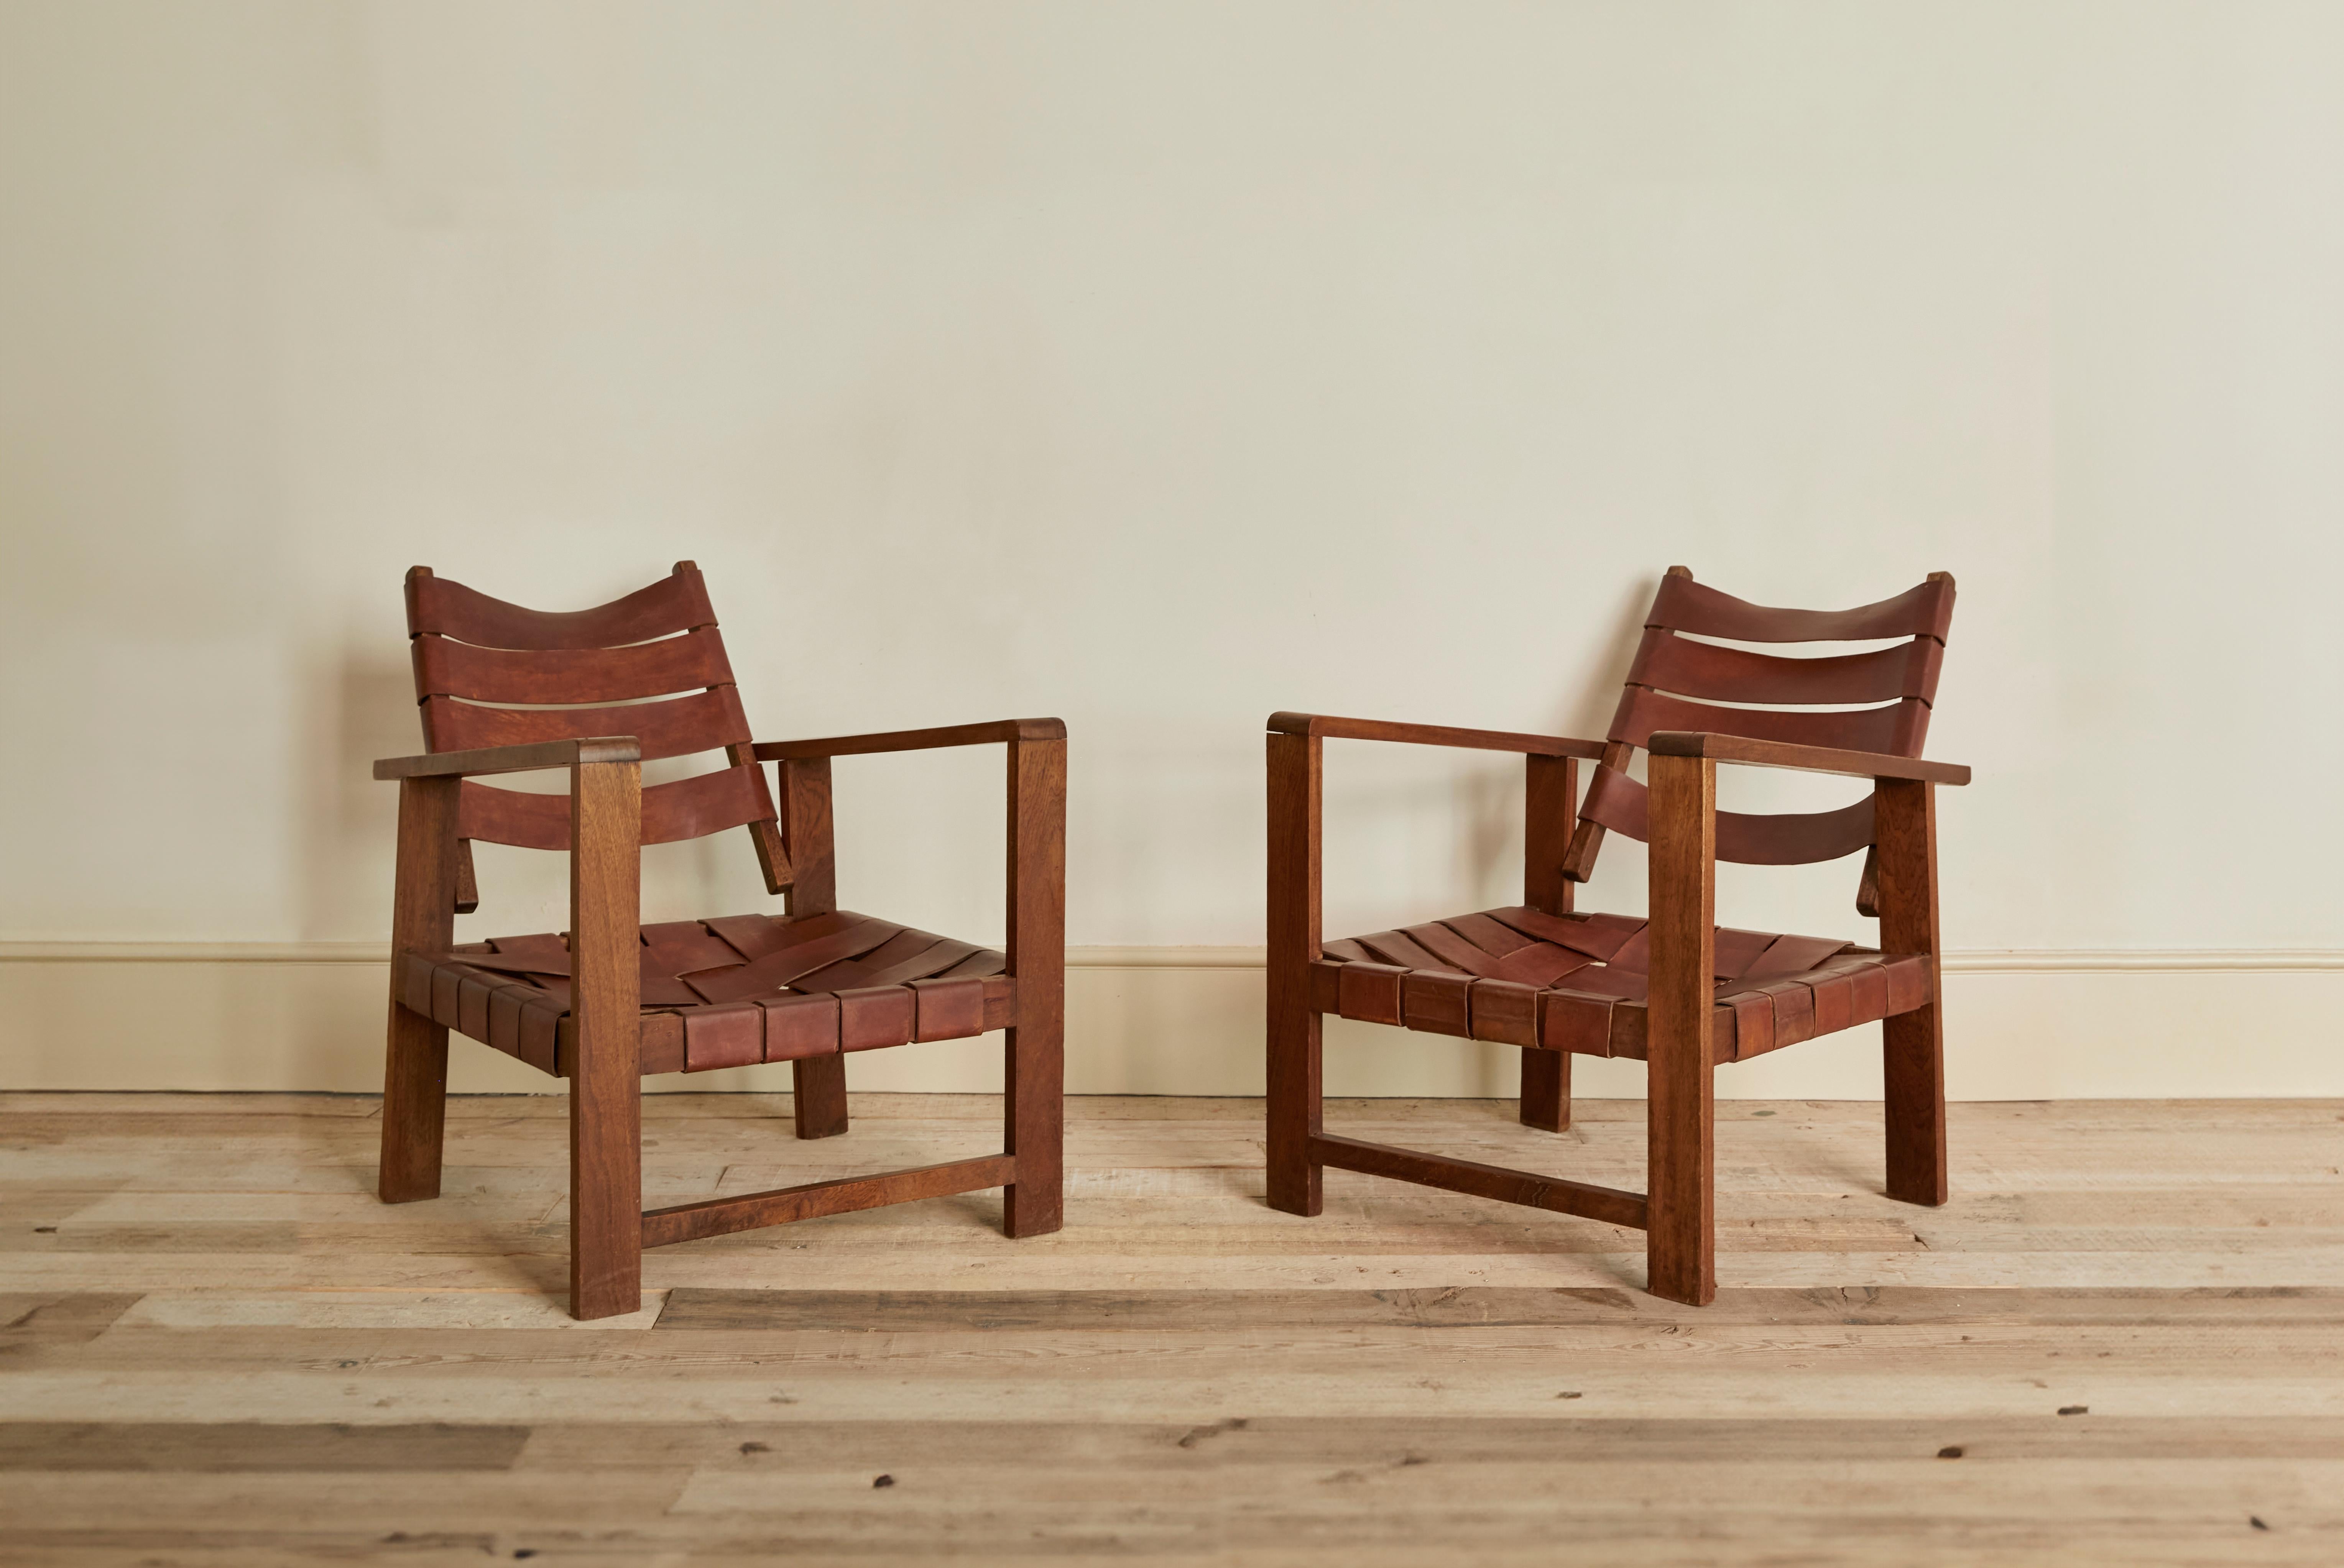 Pair of second hand wooden armchairs with braided leather seats. Leather is combined with the craftsmanship of braiding and the whole structure of the chair is naturalwood material. These chairs come togehter as a pair. They were found in a market